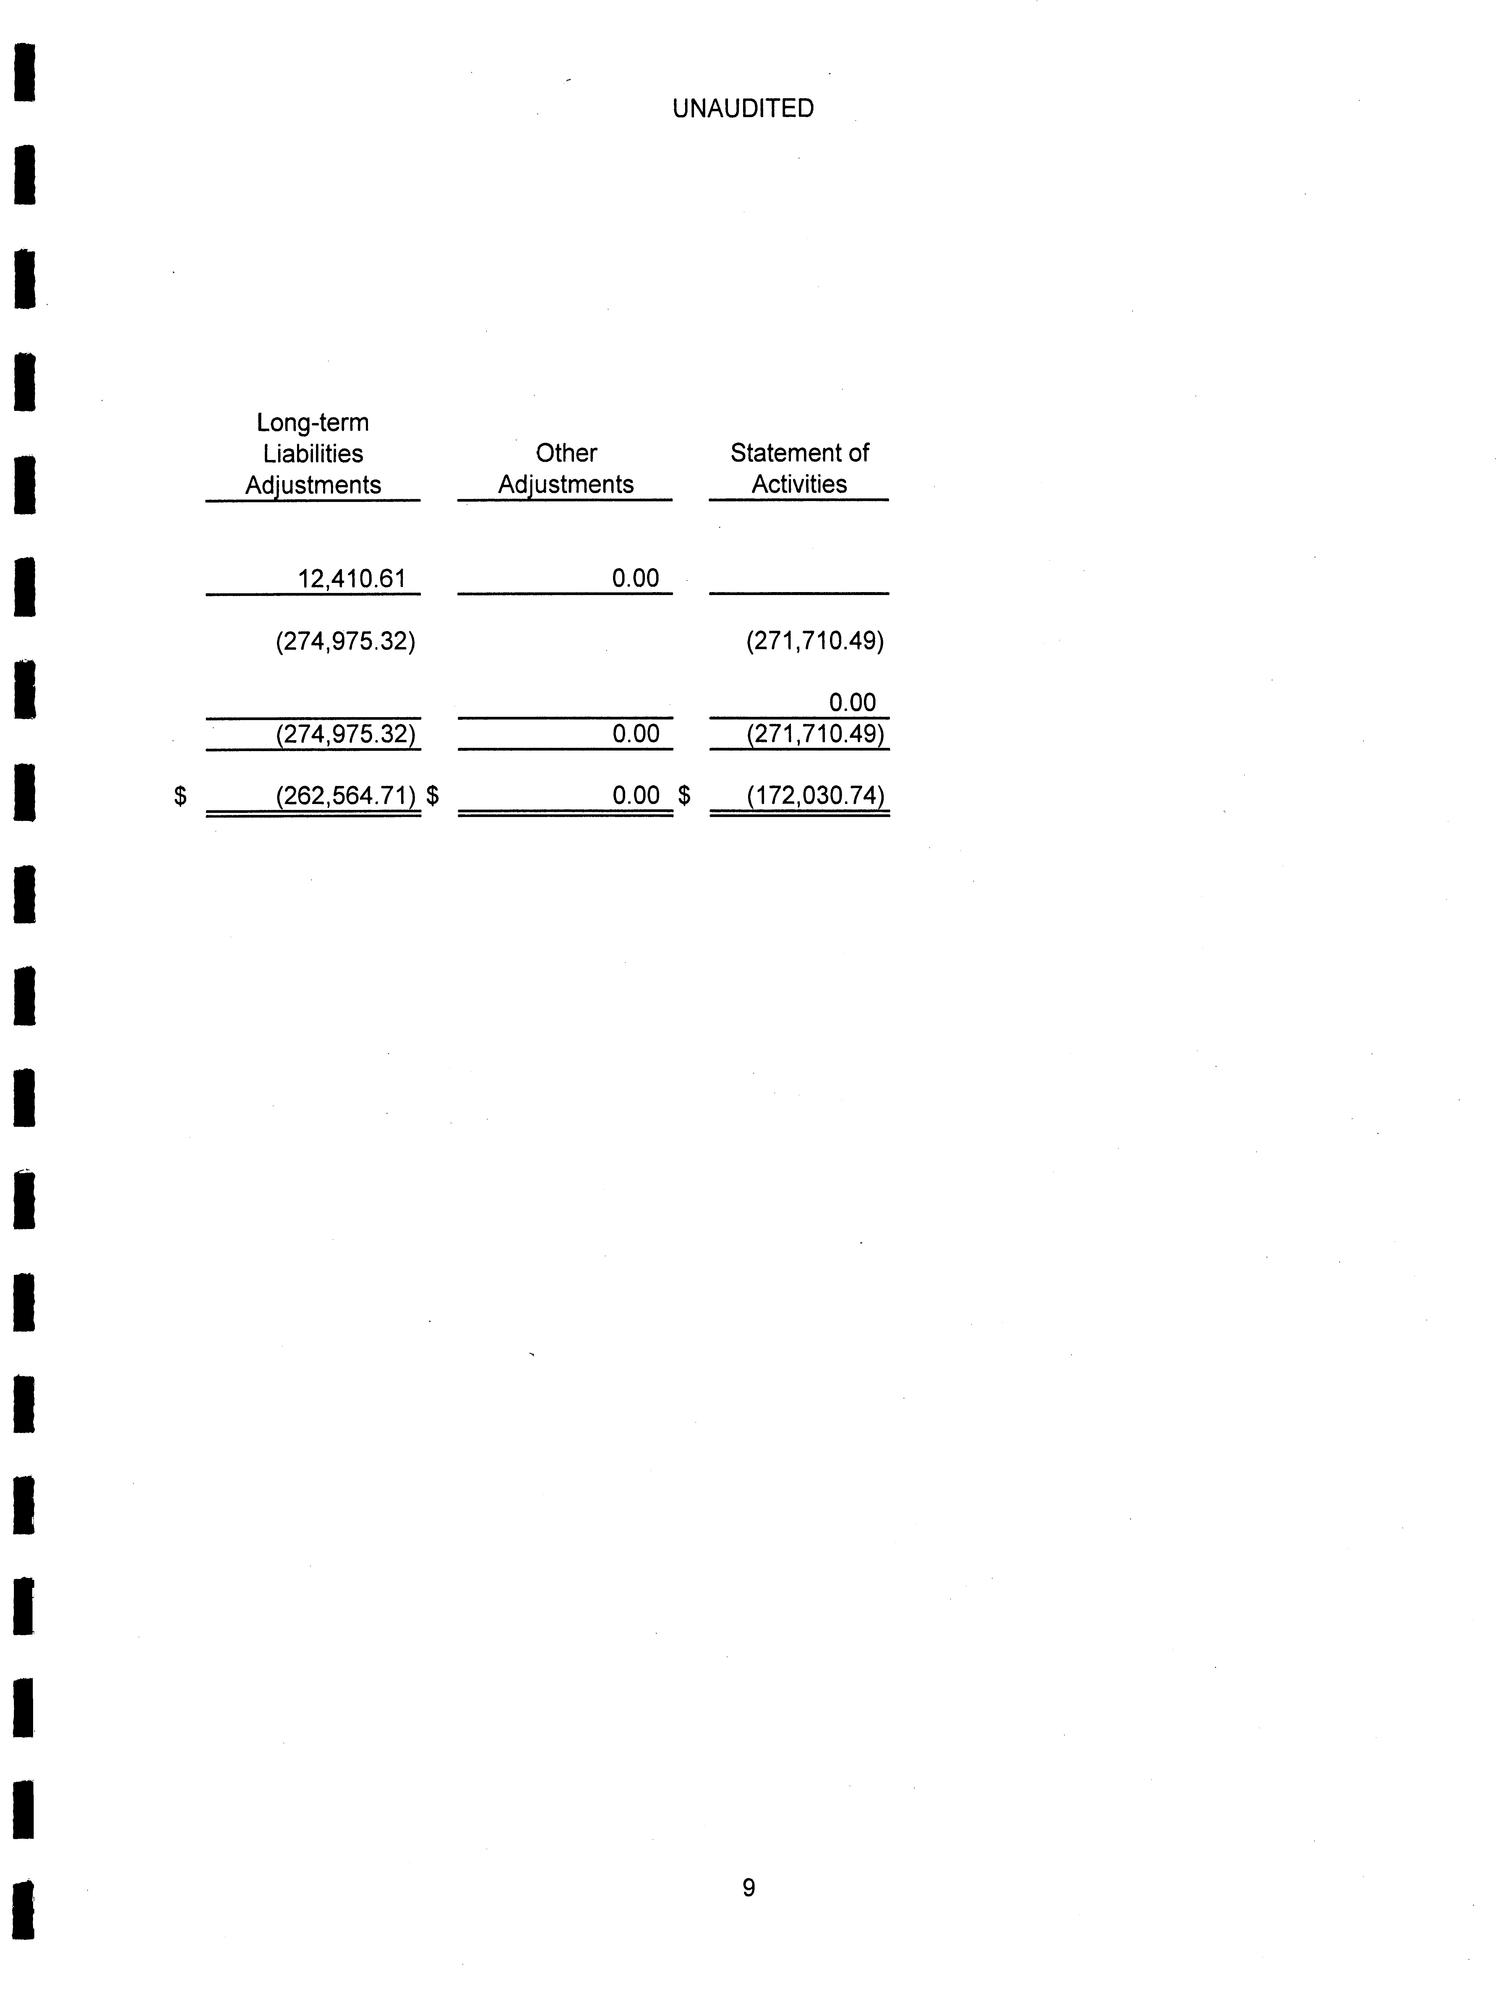 Texas State Board of Dental Examiners Annual Financial Report: 2019
                                                
                                                    9
                                                